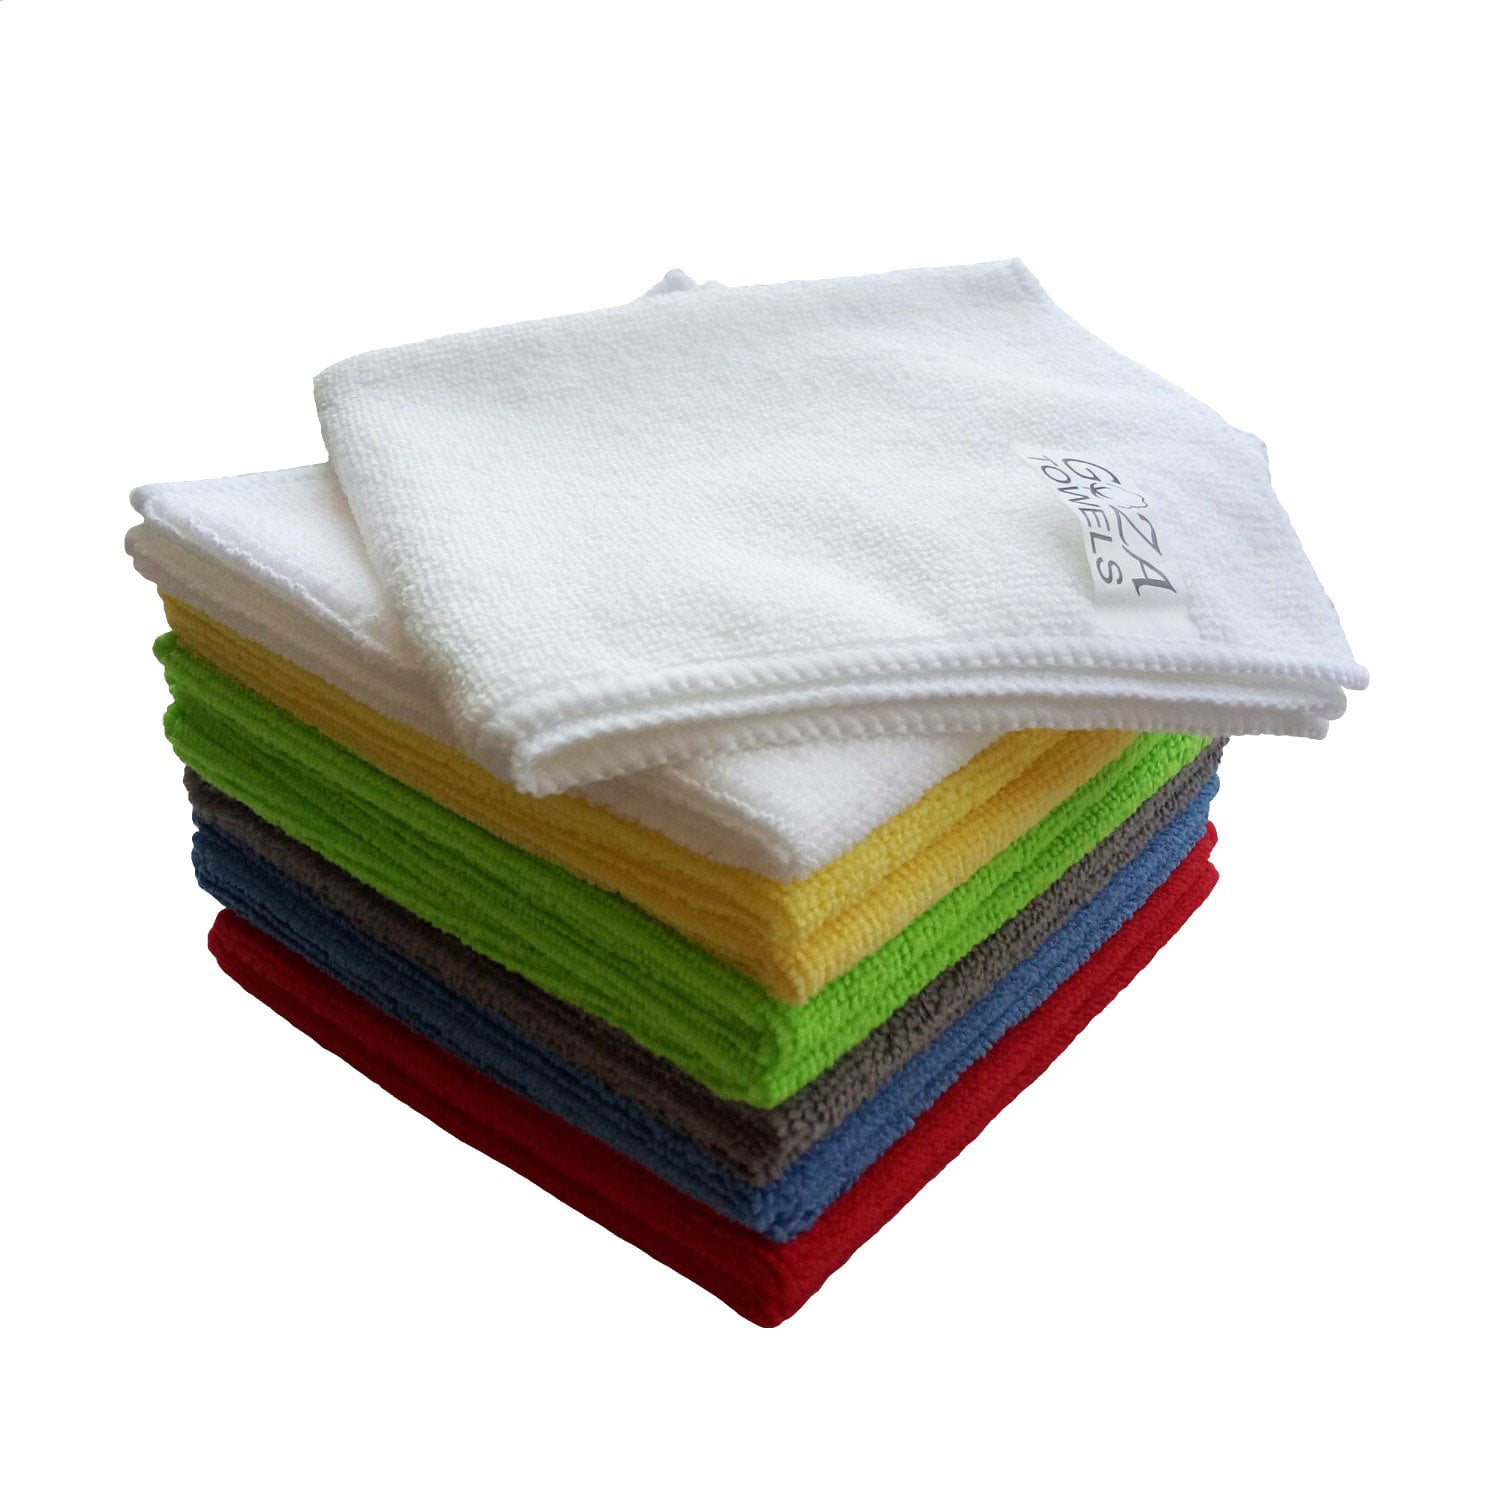 Goza Towels Microfiber Towel Cleaning Cloths All-Purpose 16"x16" 12 Pack 